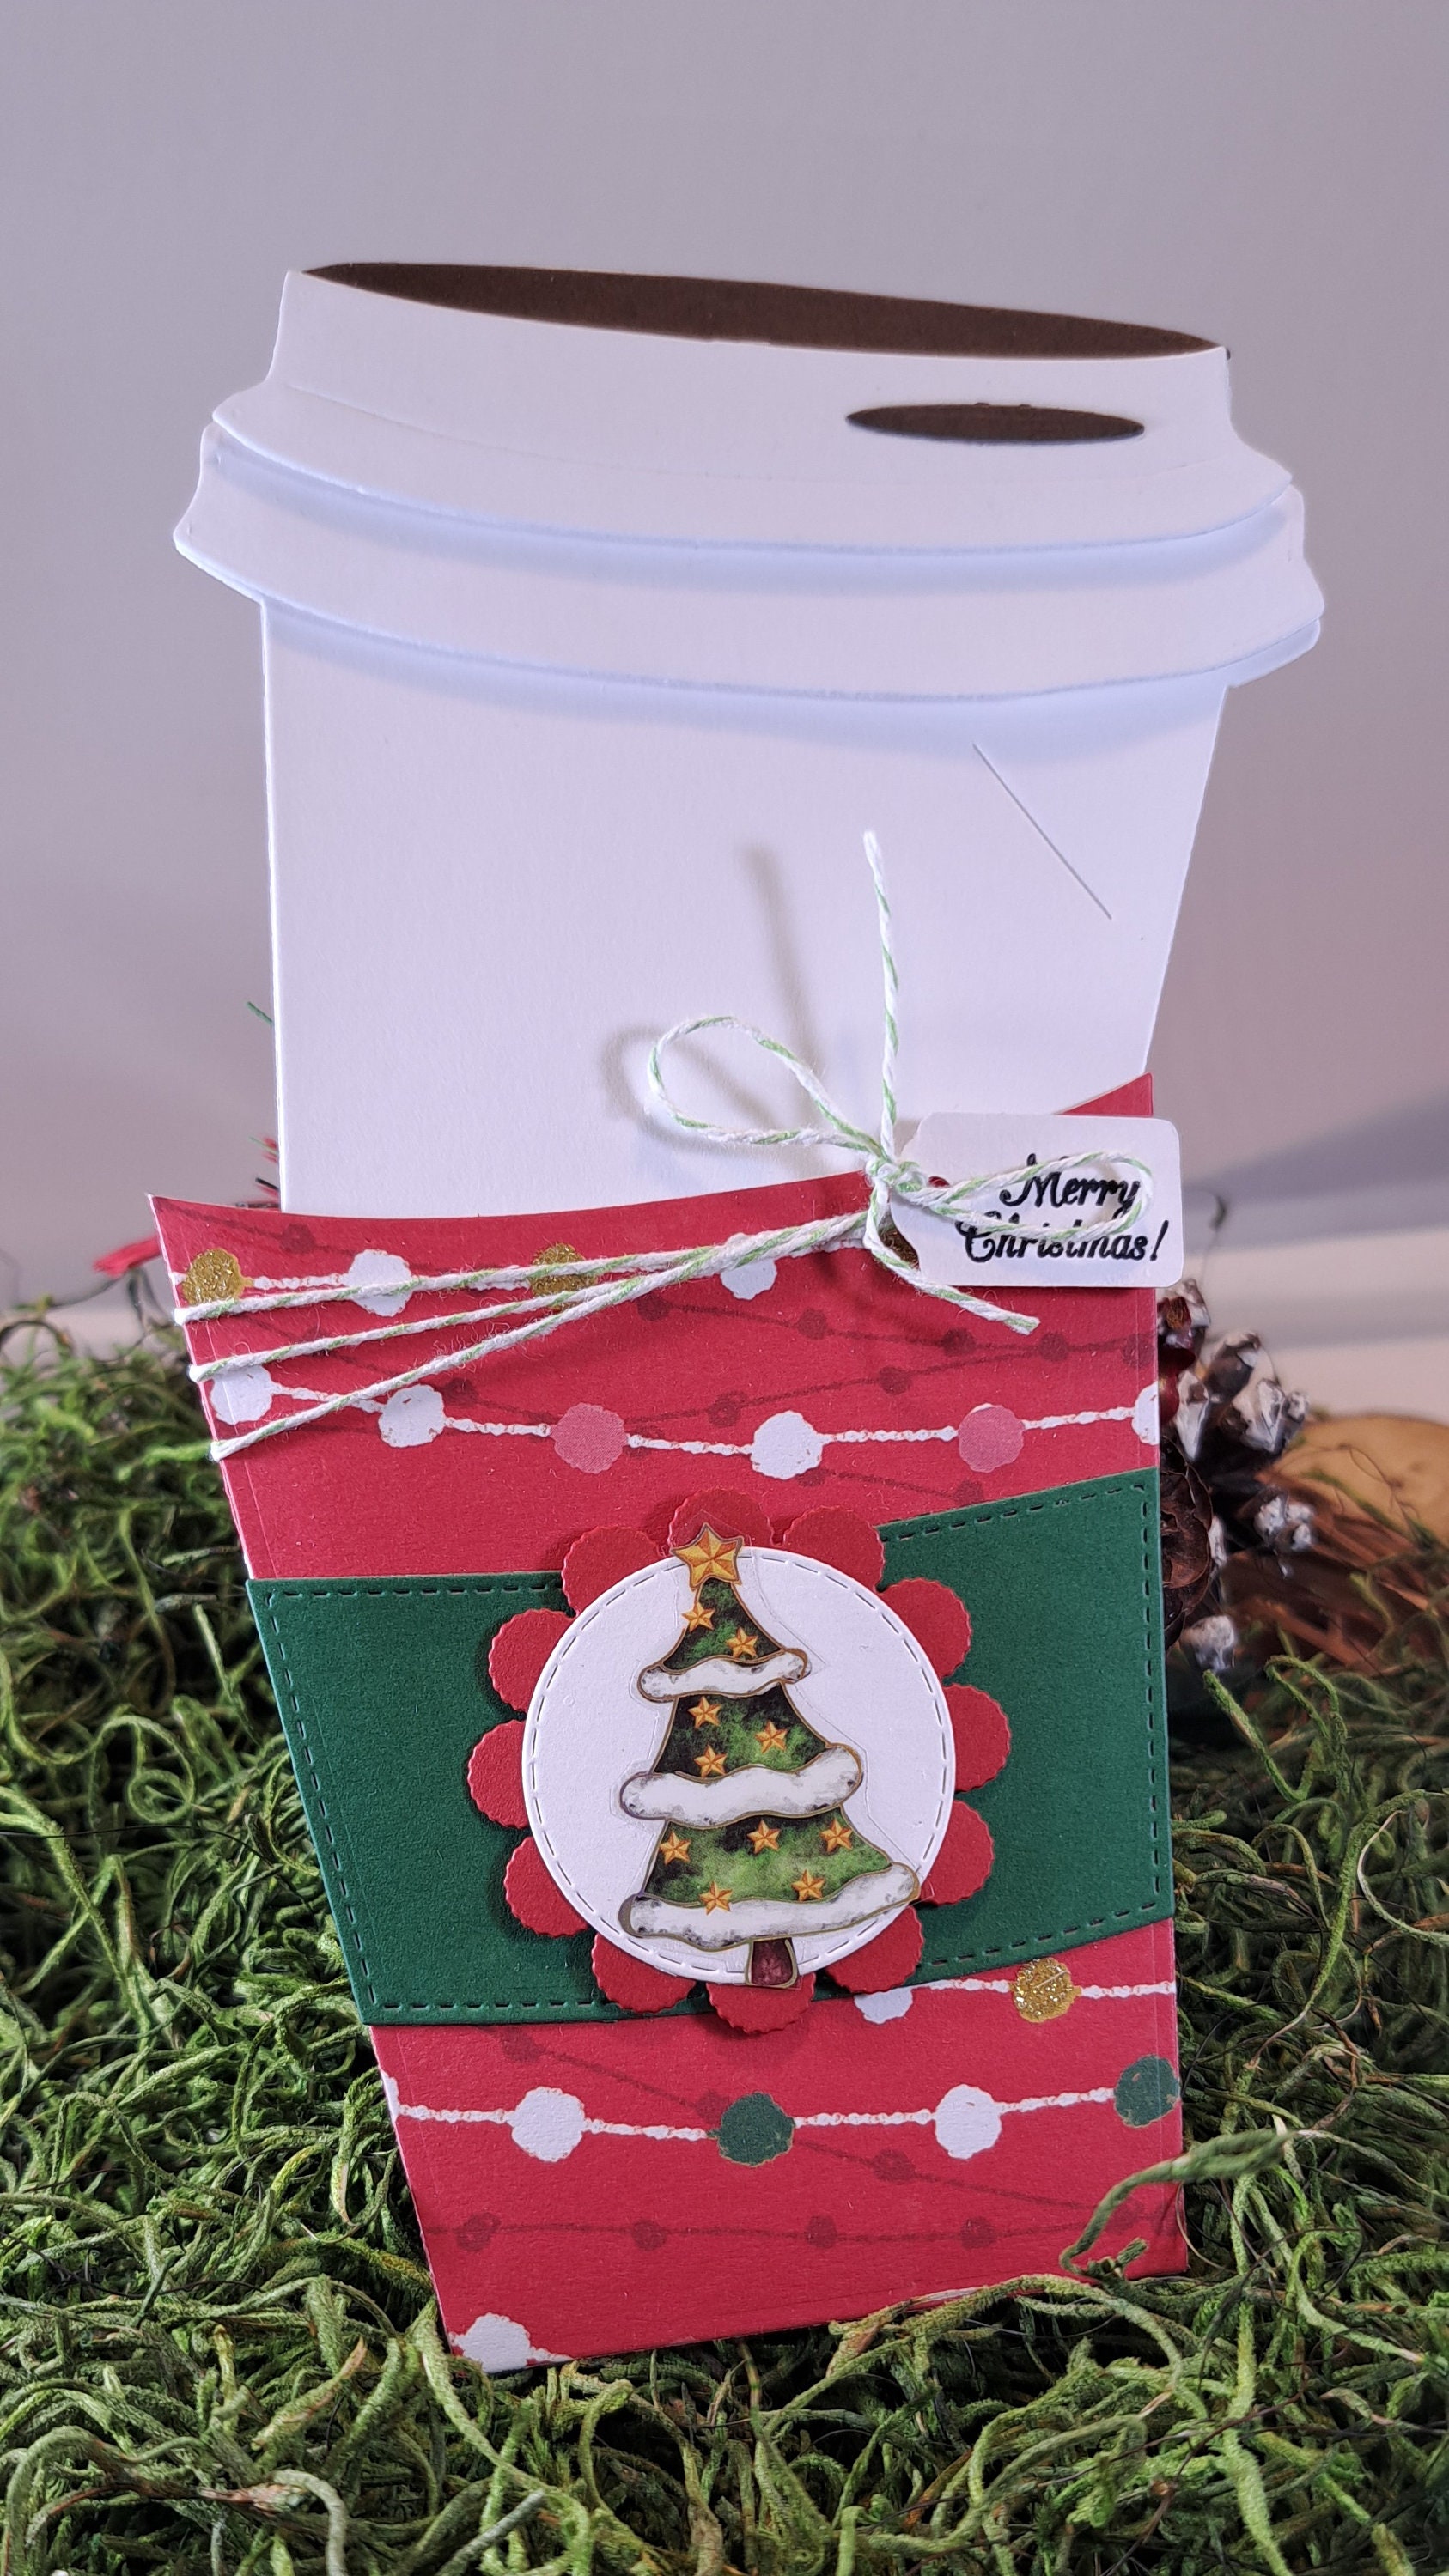 Easy Mount Coffee Cup Holder Christmas Gift Gift for Her Coffee